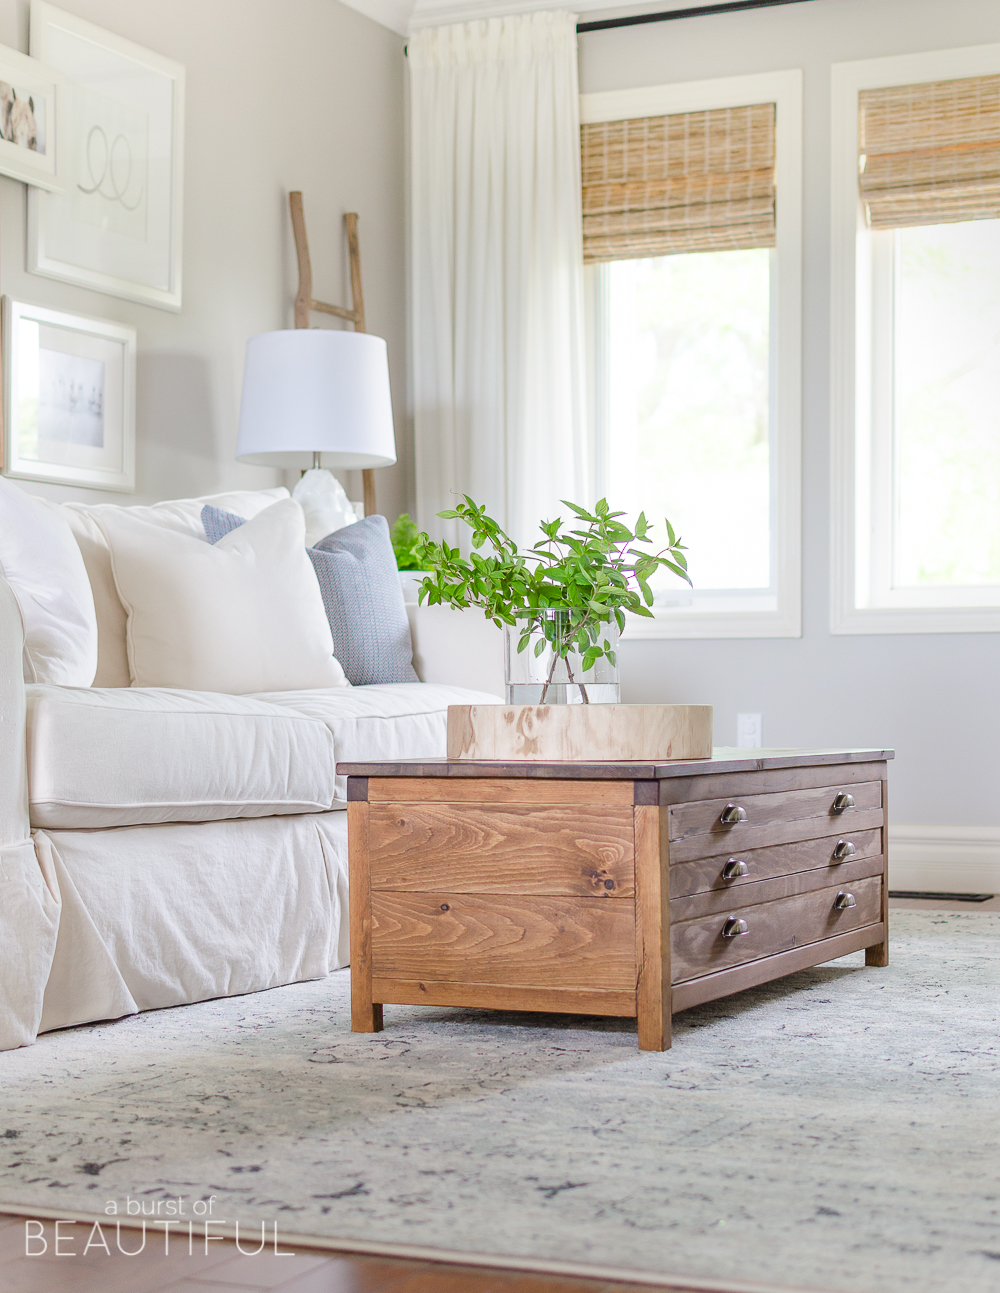 Build this beautiful Restoration Hardware inspired printmaker’s coffee table for a fraction of the cost. Download the free plans here.